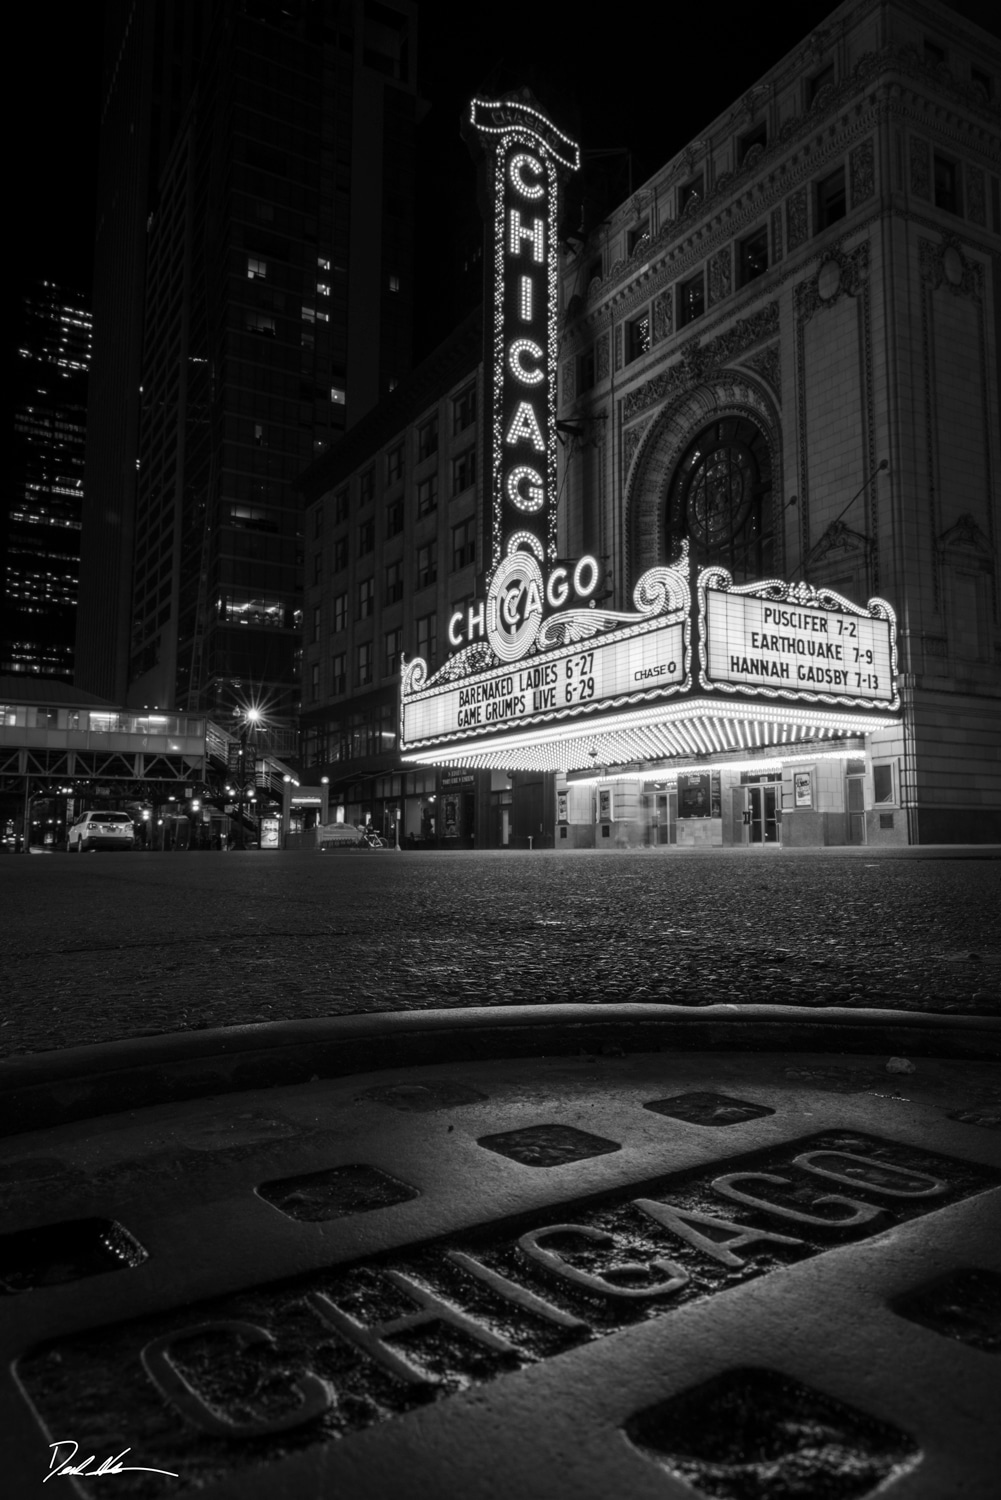 black and white image of a sewer cap in front of the Chicago Theatre